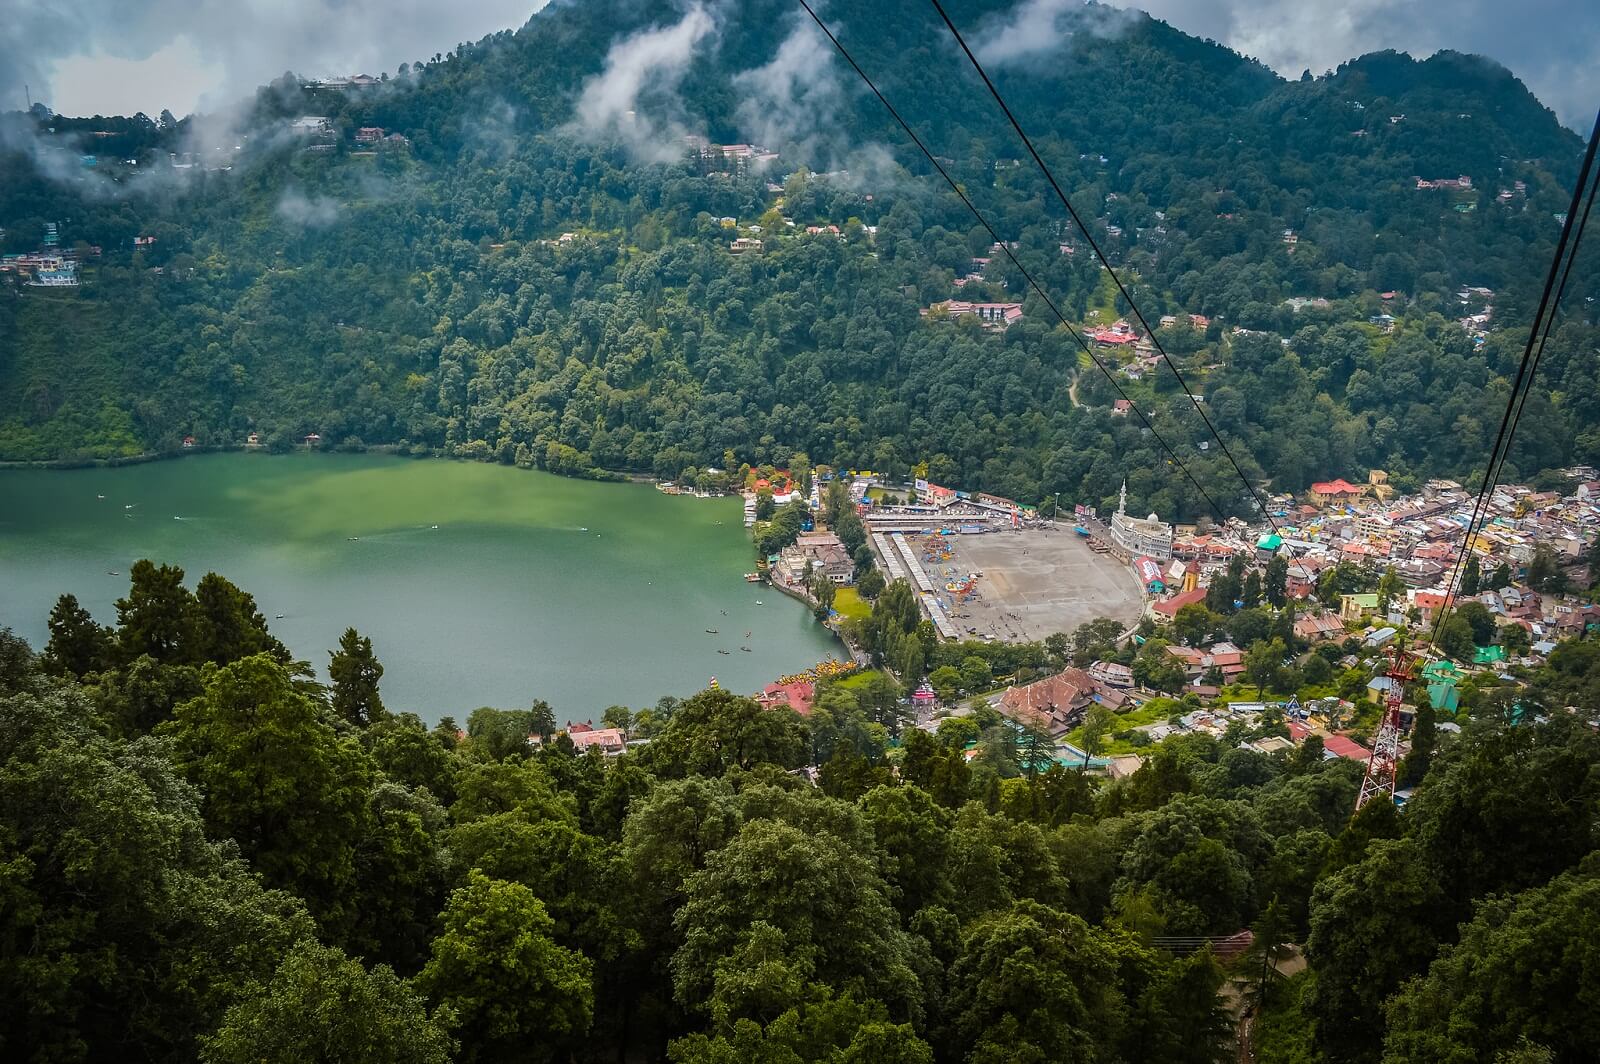 Uti hill station in india